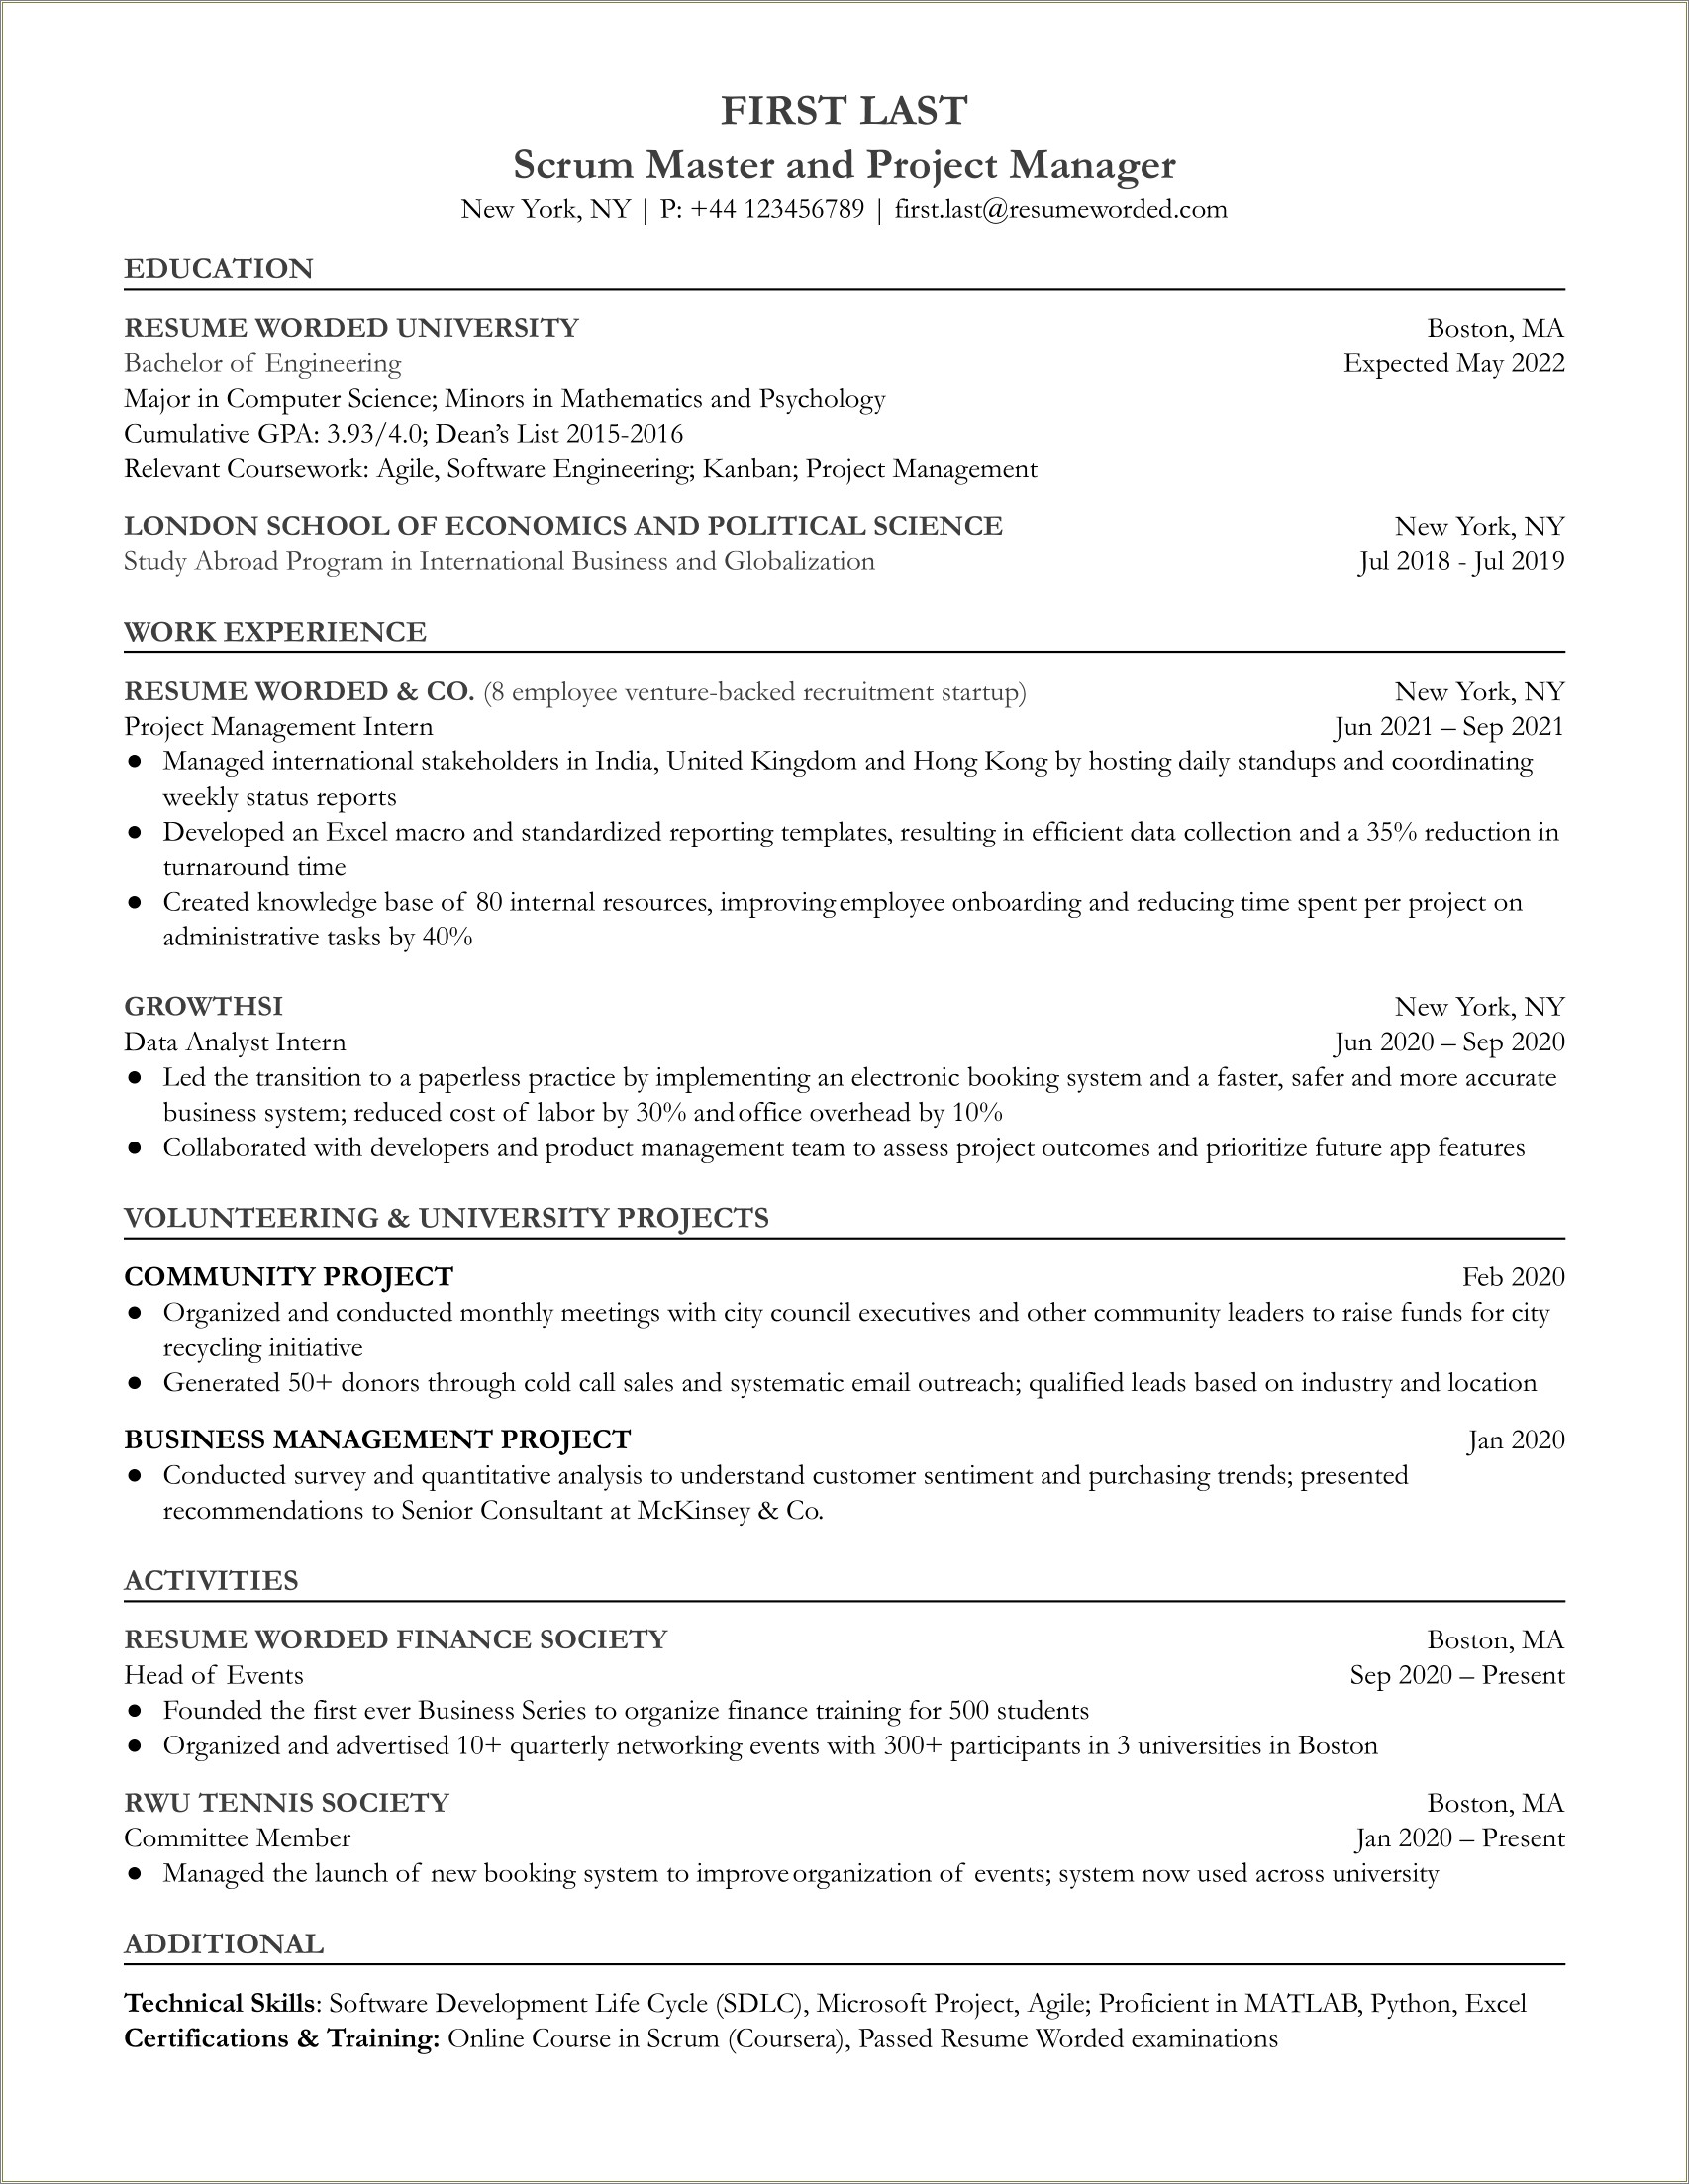 Scrum Master Resume With Technical Skills